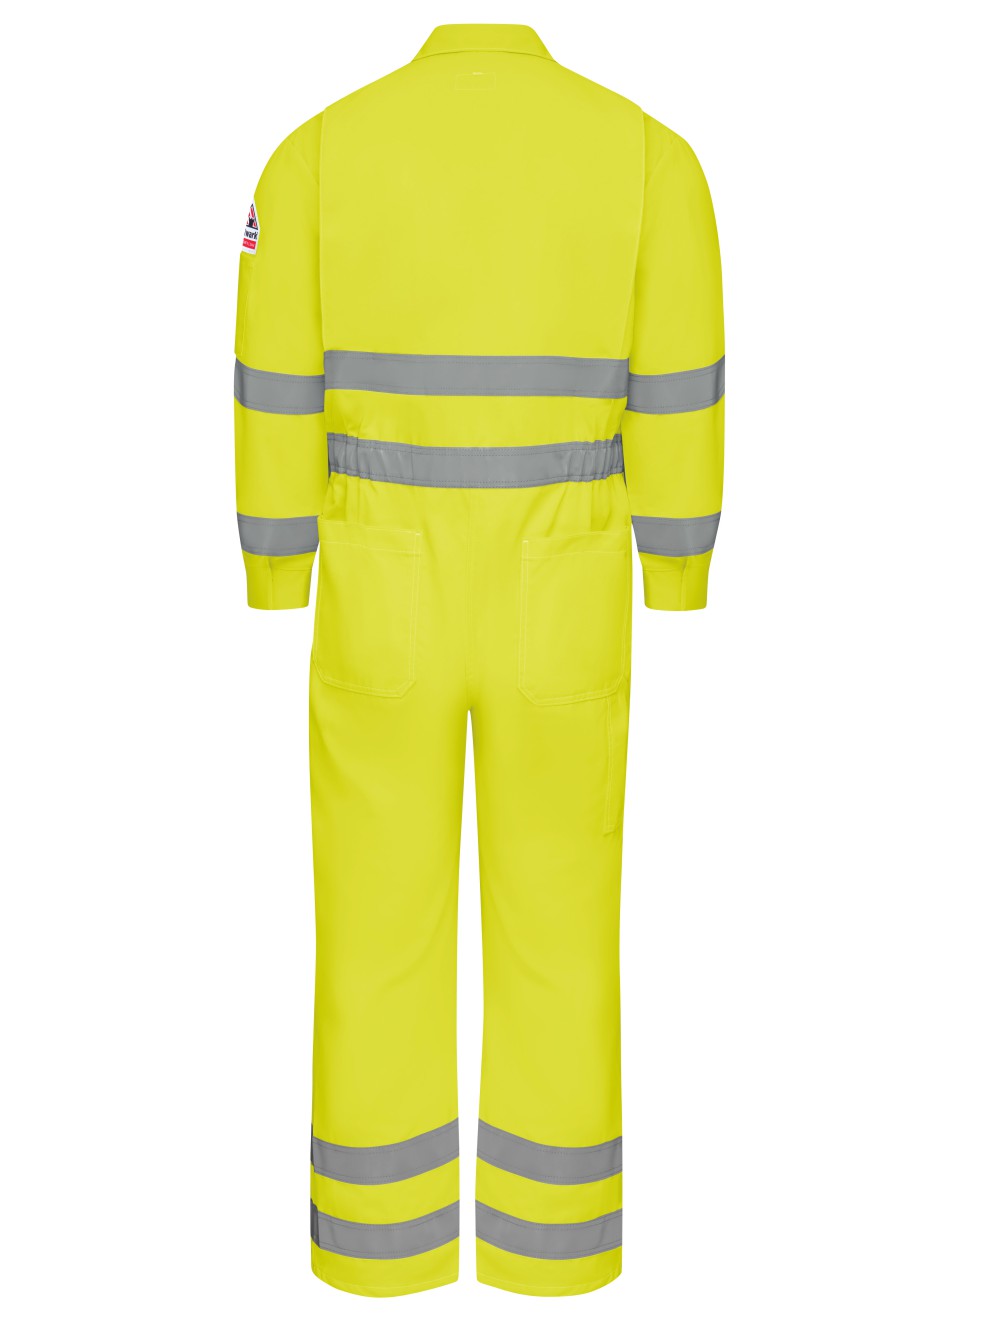 Men's Lightweight FR Hi-Visibility Deluxe Coverall with Reflective Trim ...